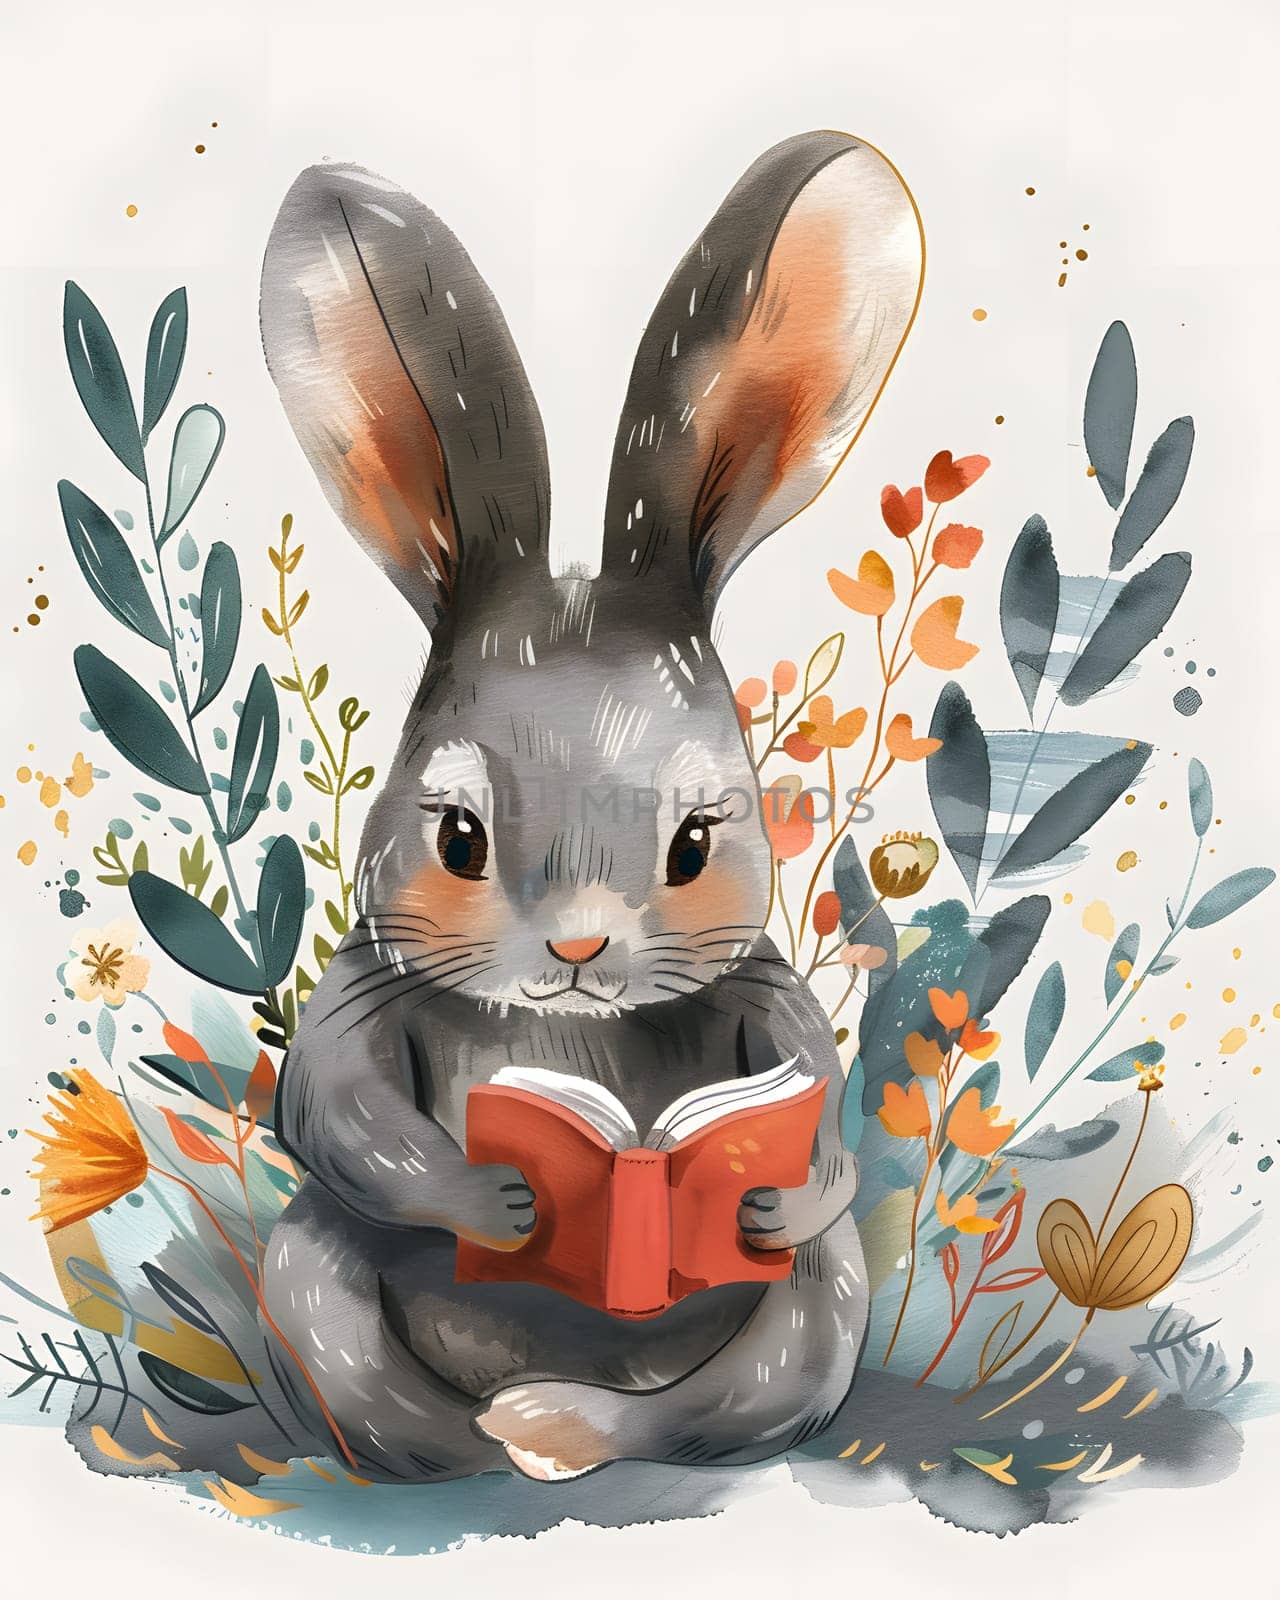 A terrestrial organism, the rabbit, is peacefully sitting in the grass, engrossed in a book. Its delicate snout twitches occasionally as it reads, resembling a scene from a painting